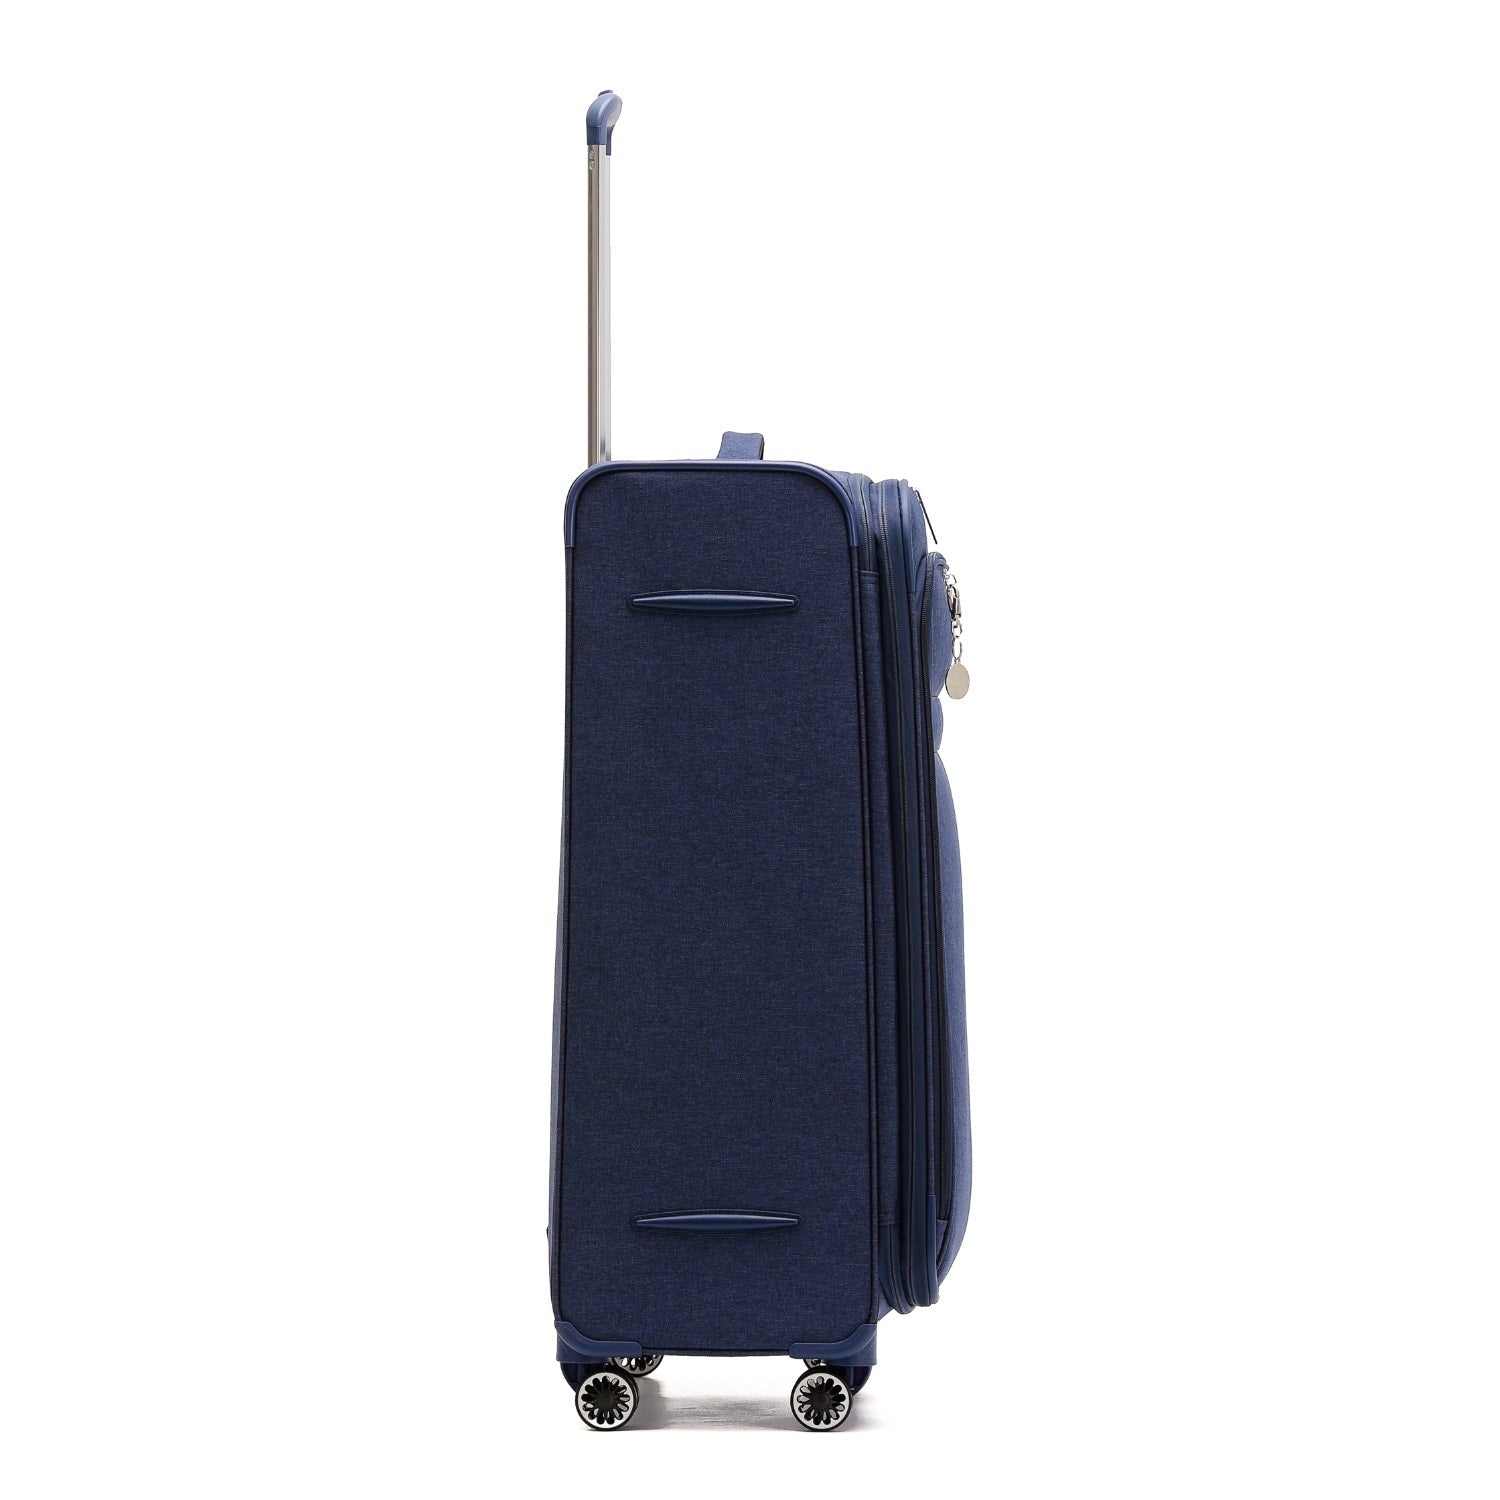 Qantas - QF400 81cm Large Adelaide Soft sided spinner - Navy-4